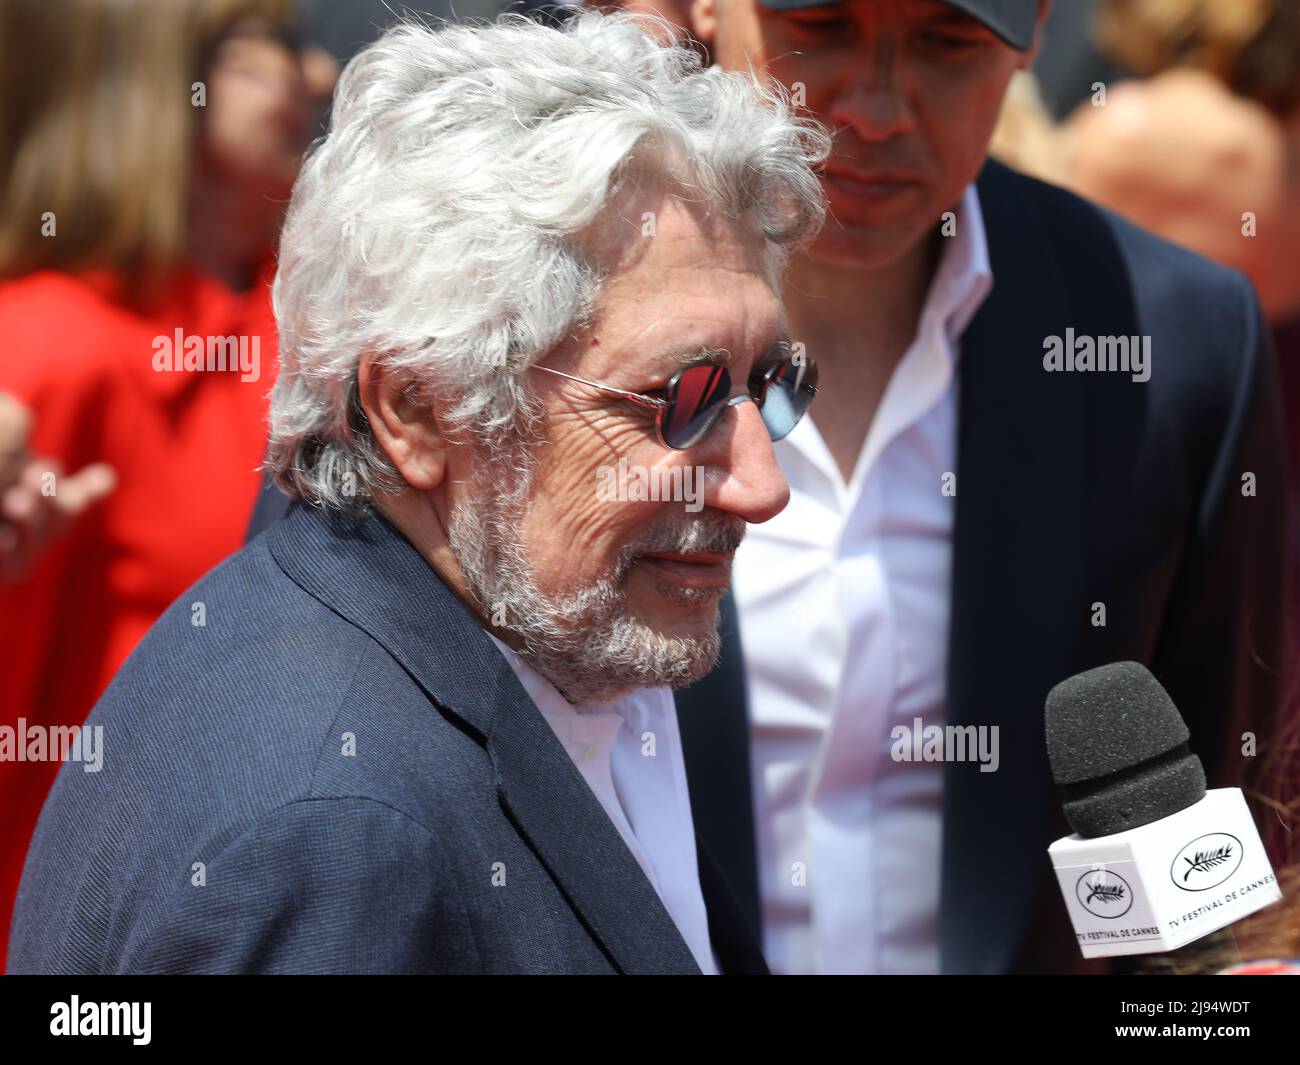 May 20, 2022, Cannes, Cote d'Azur, France: French actor ALAIN CHABAT  attends the 'Le Petit Nicolas - Qu'est ce qu'on attend pour etre heureux'  special screening during 75th annual Cannes Film Festival (